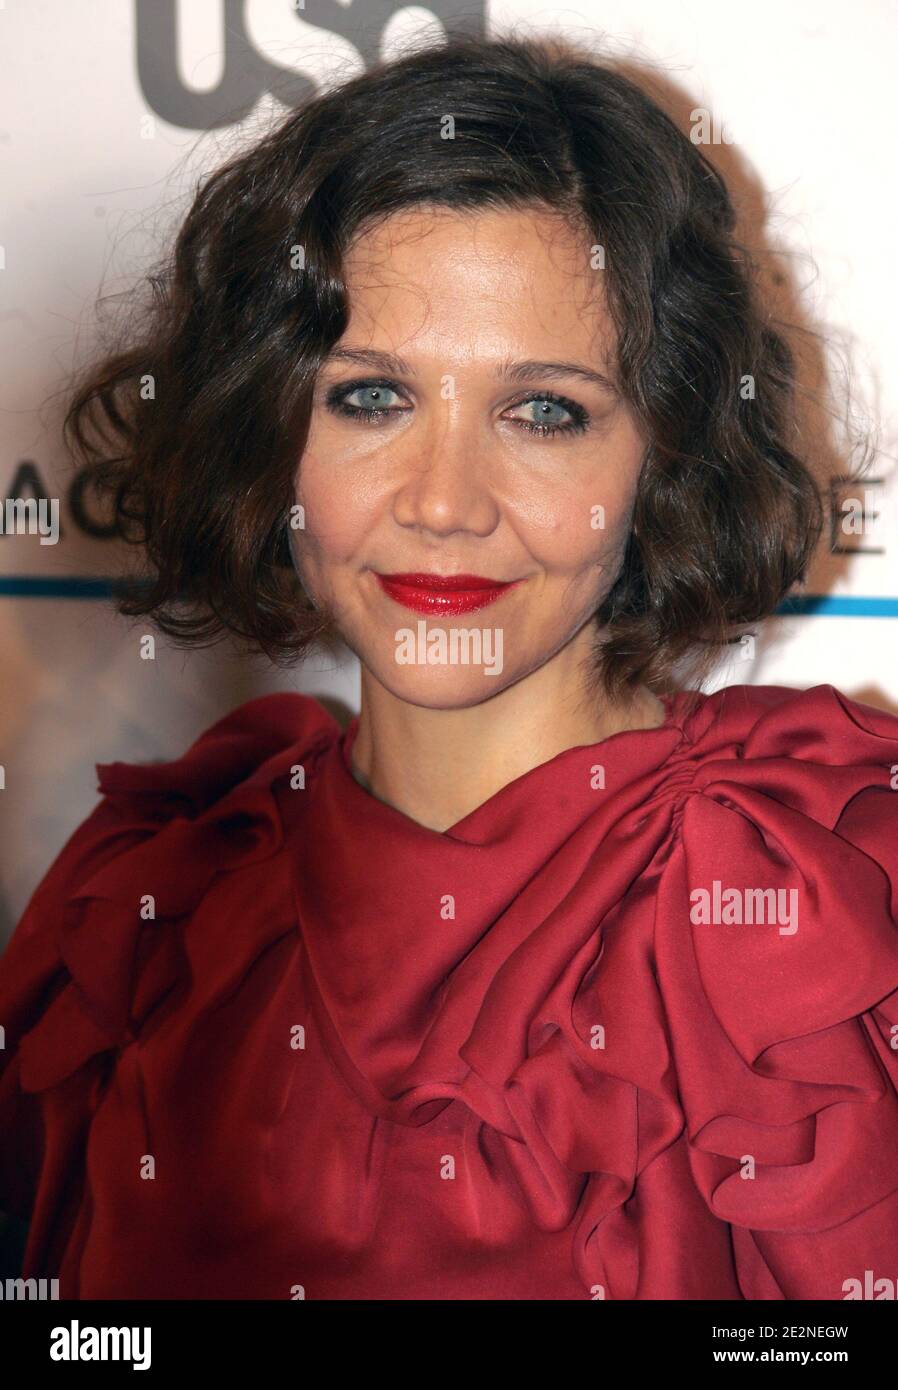 Actress Maggie Gyllenhaal arriving for The USA Network's Character Approved cocktail reception in New York City, NY, USA on February 25, 2010. Photo by Charles Guerin/ABACAPRESS.COM Stock Photo